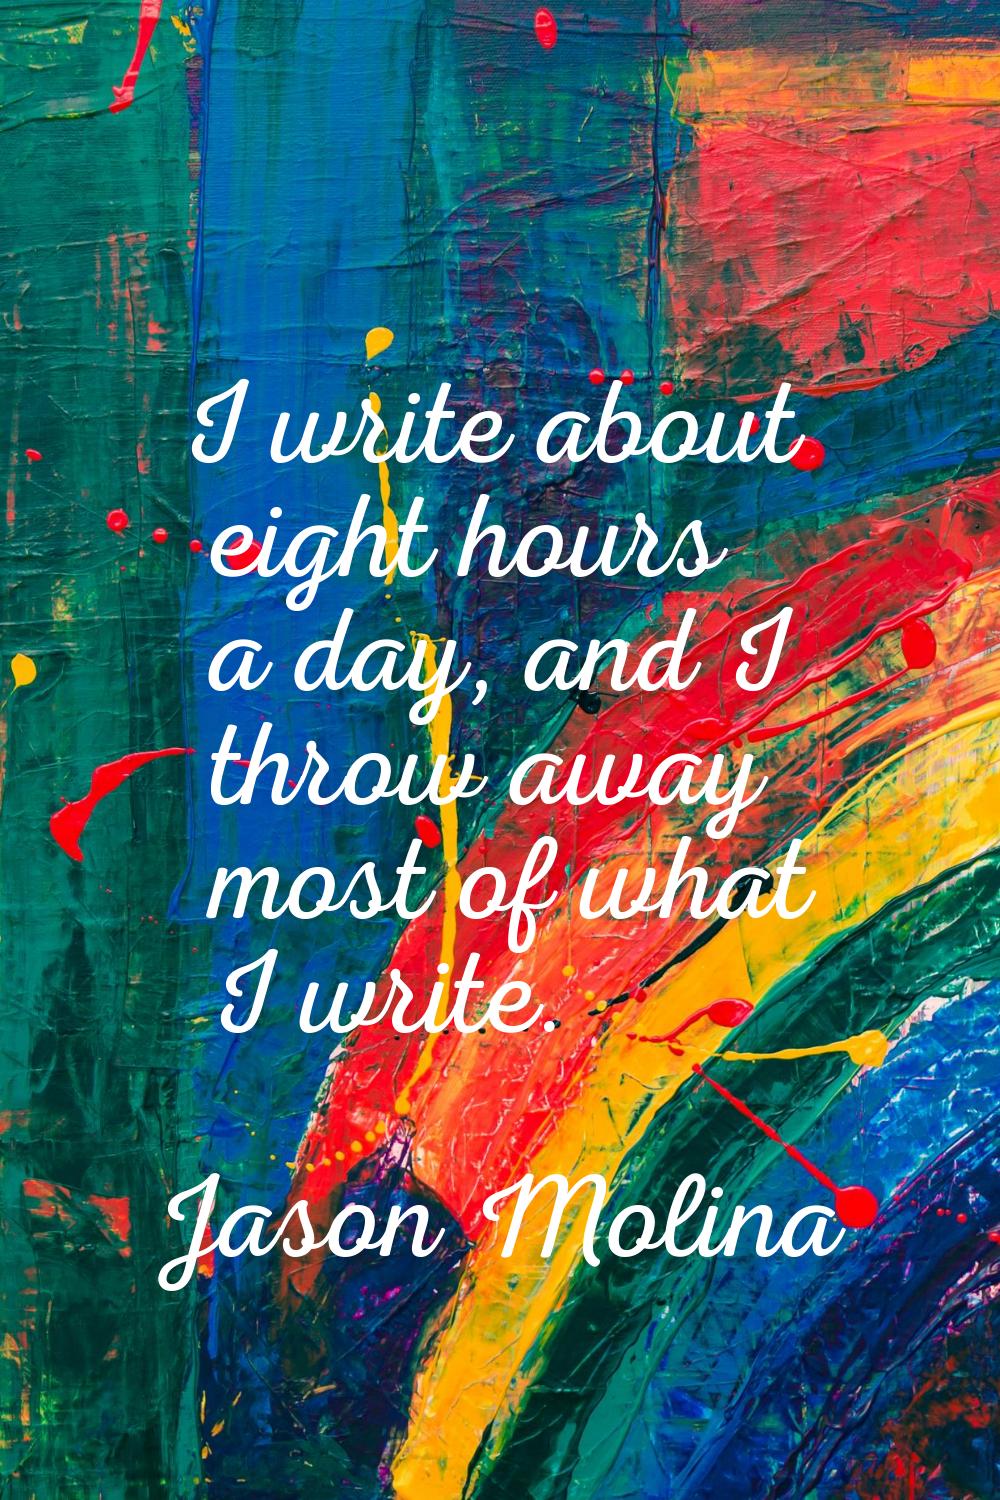 I write about eight hours a day, and I throw away most of what I write.